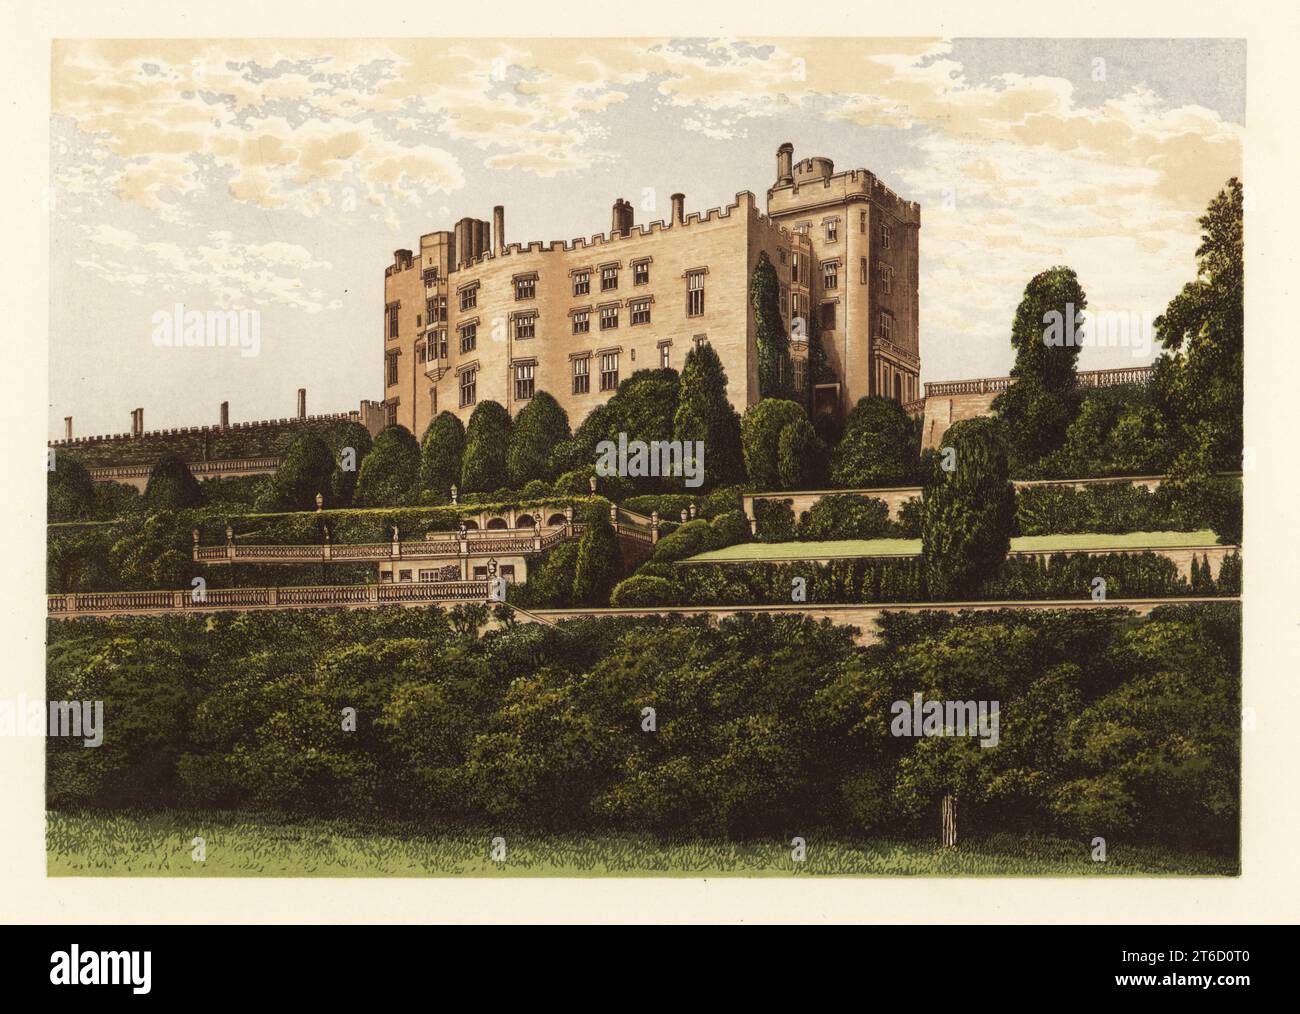 Powis Castle, Montgomeryshire, Wales. Medieval castle, fortress and mansion in red stone built in the 13th century repaired in the 19th century by Sir Robert Smirke for Edward Clive, 1st Earl of Powis, son of Robert Clive, who made his fortune at the Battle of Plassey. Colour woodblock by Benjamin Fawcett in the Baxter process of an illustration by Alexander Francis Lydon from Reverend Francis Orpen Morriss Picturesque Views of the Seats of Noblemen and Gentlemen of Great Britain and Ireland, William Mackenzie, London, 1880. Stock Photo